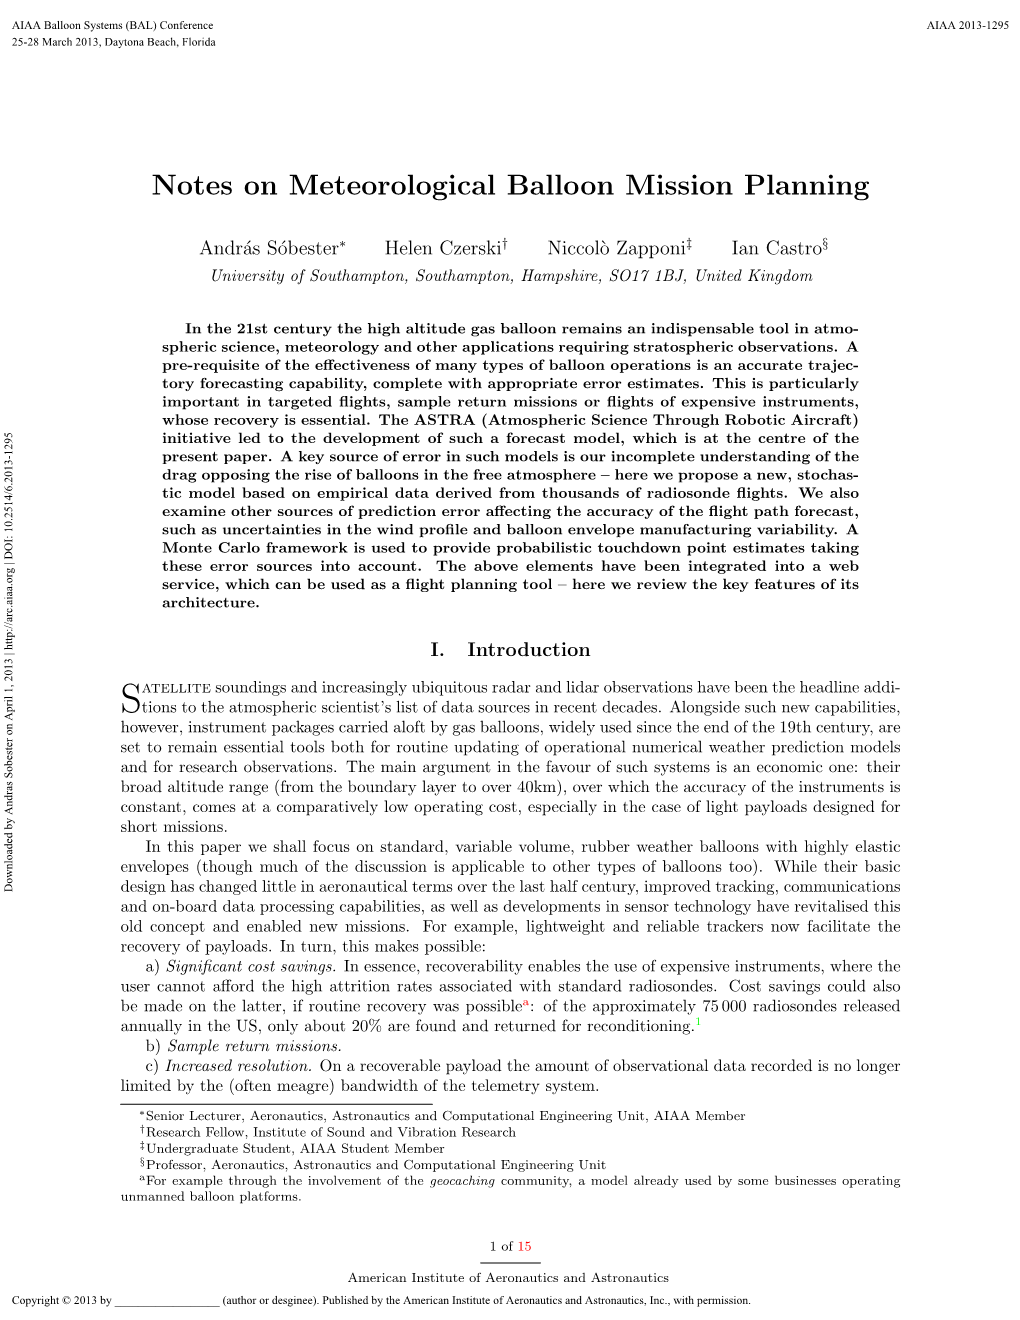 Notes on Meteorological Balloon Mission Planning